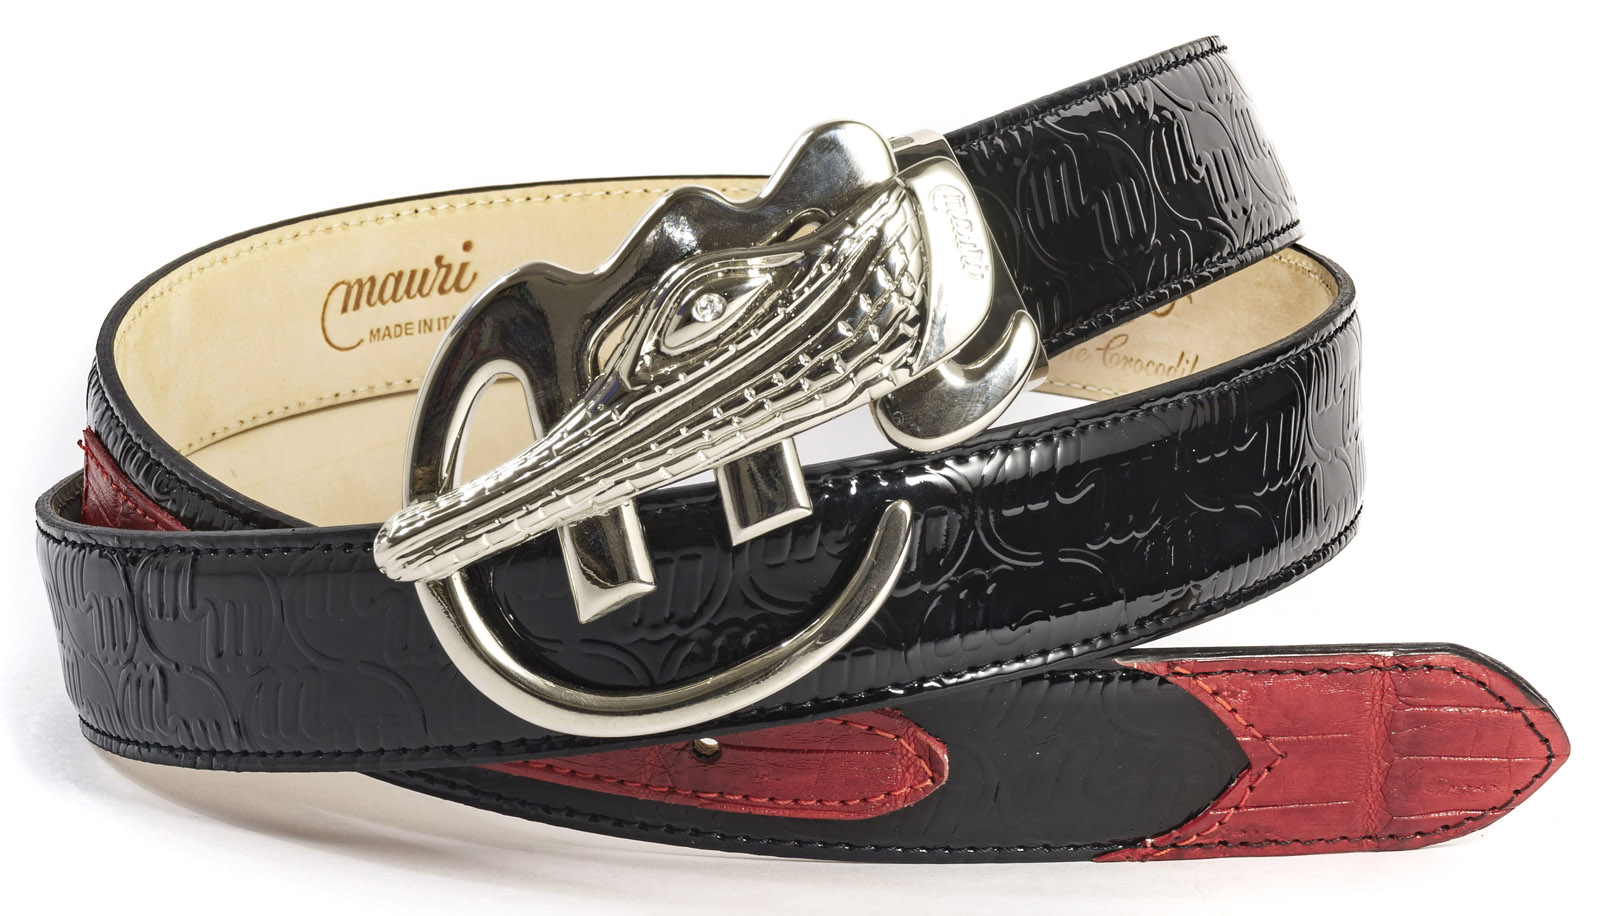 Mauri Genuine Patent Embossed / Baby Crocodile Hand-Painted Belt With Buckle AB6.